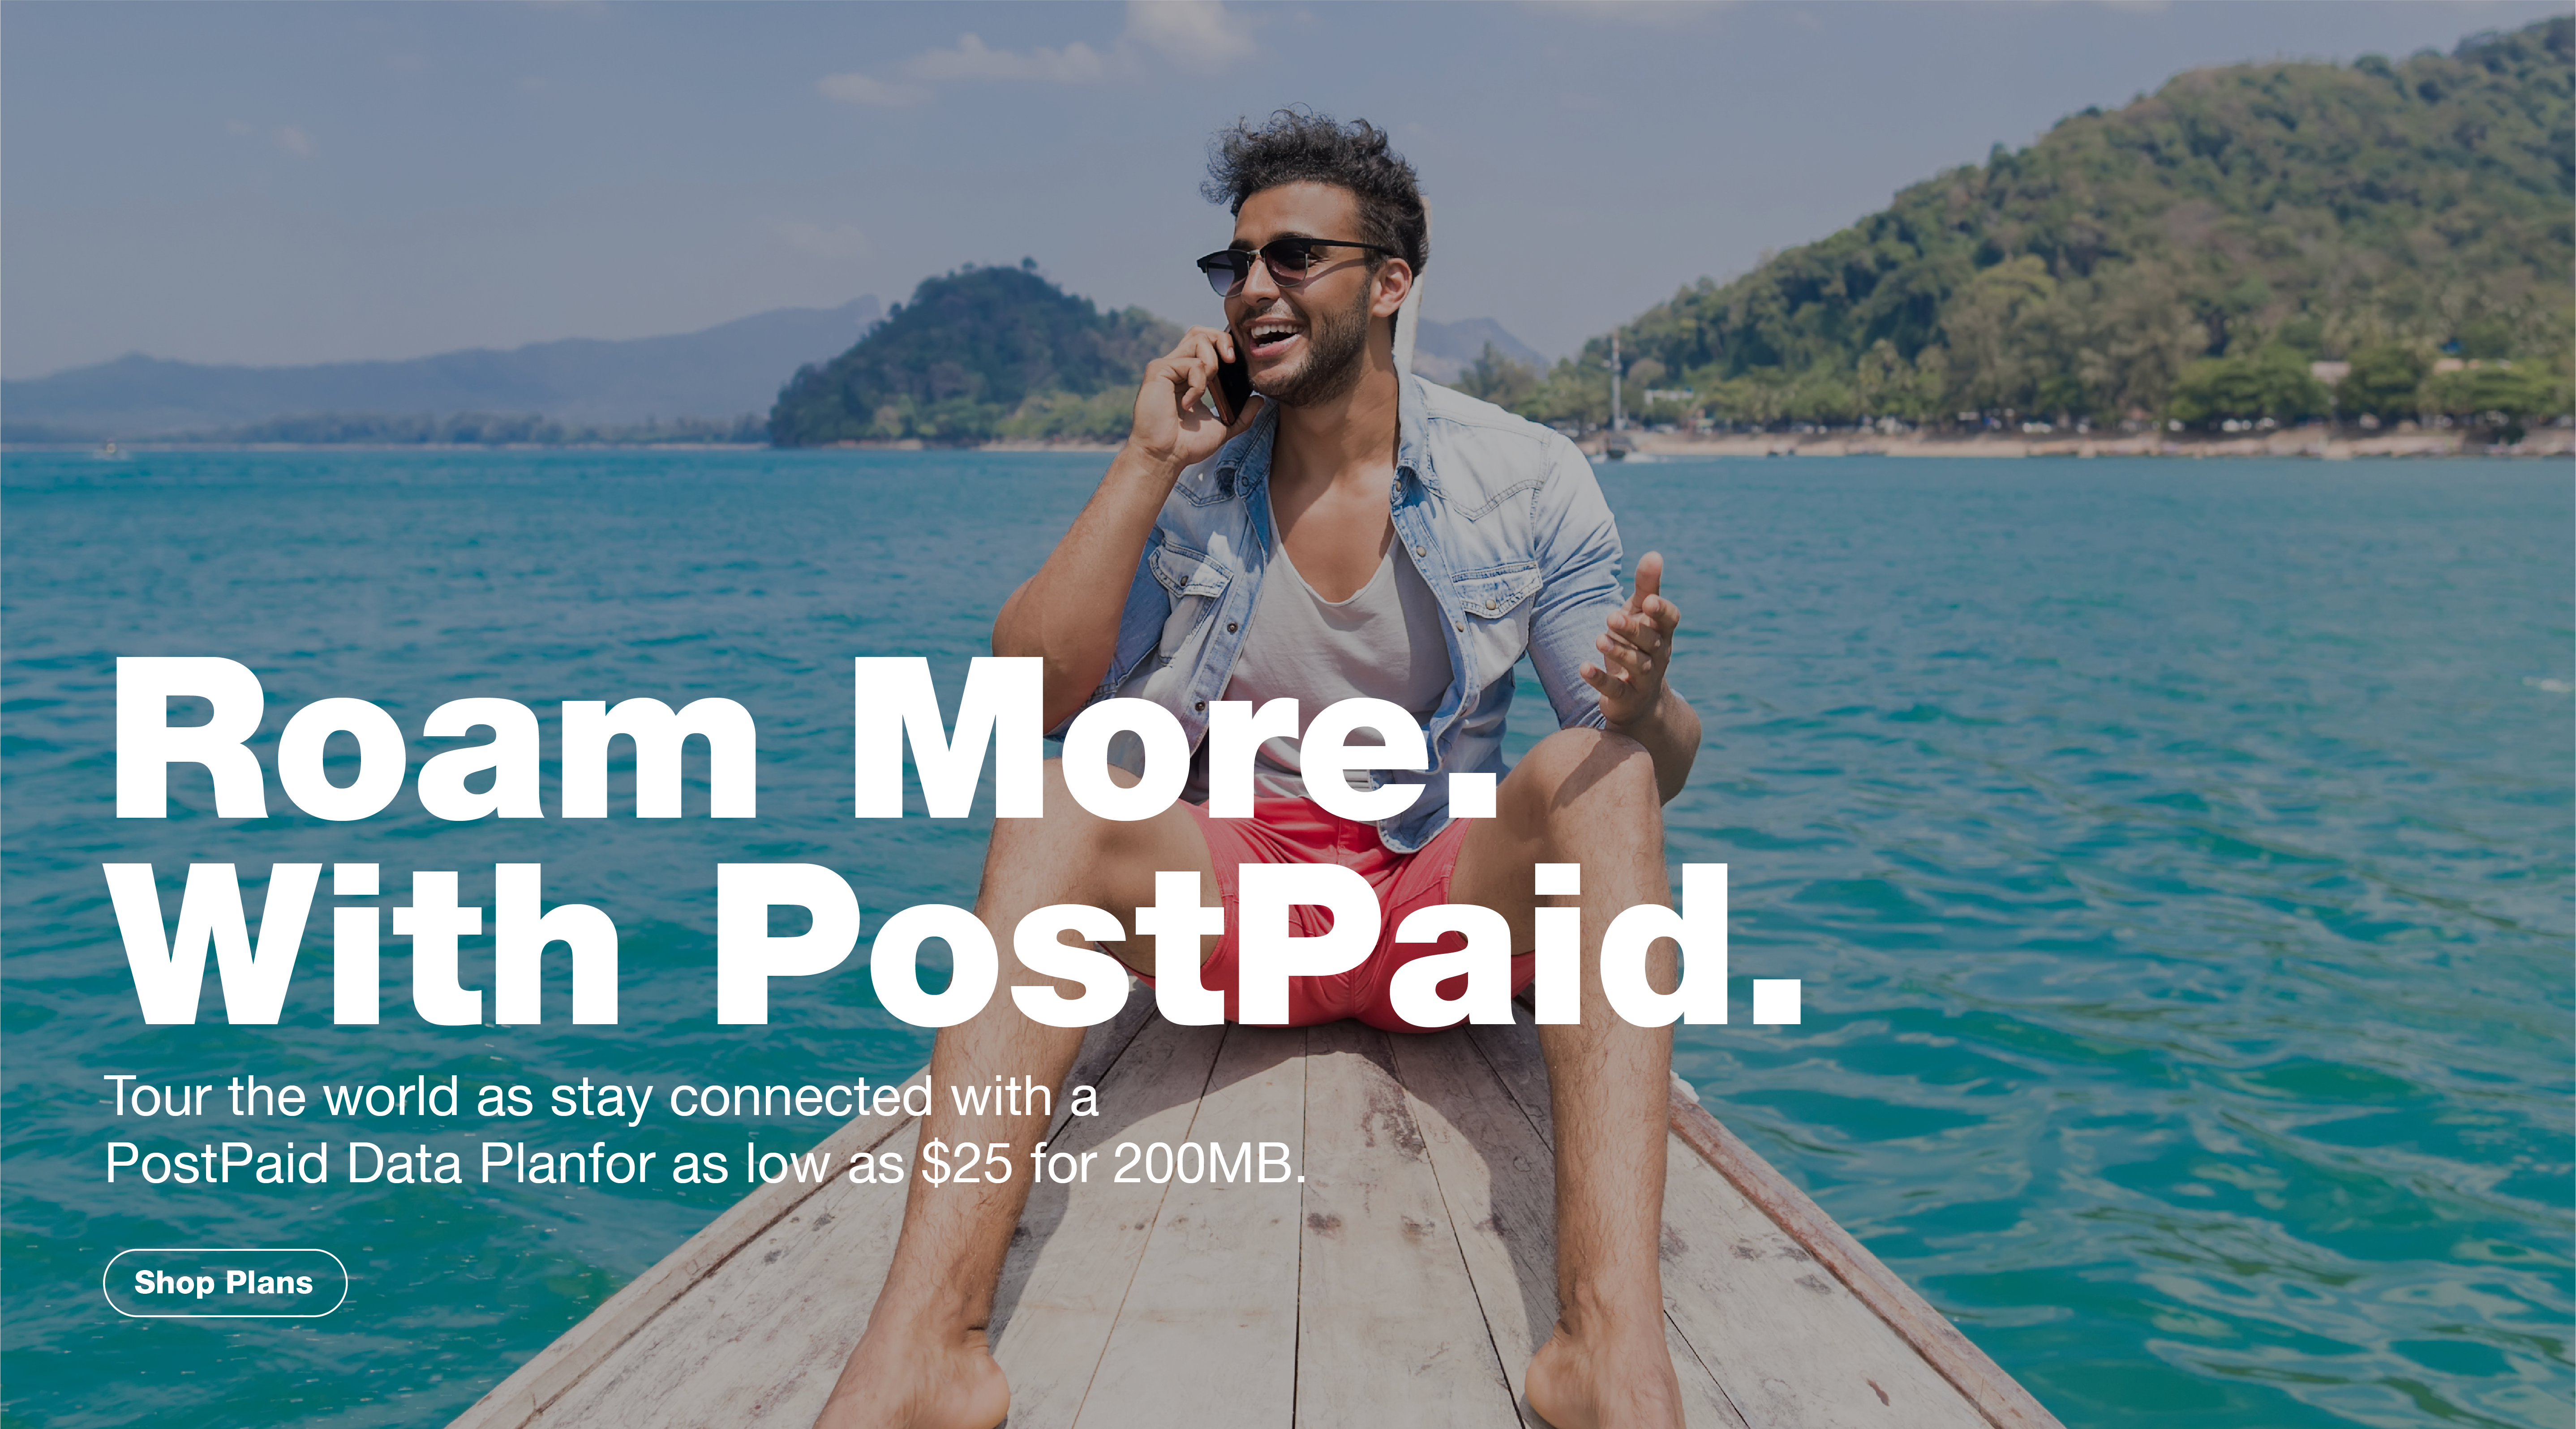 Roam More with PostPaid